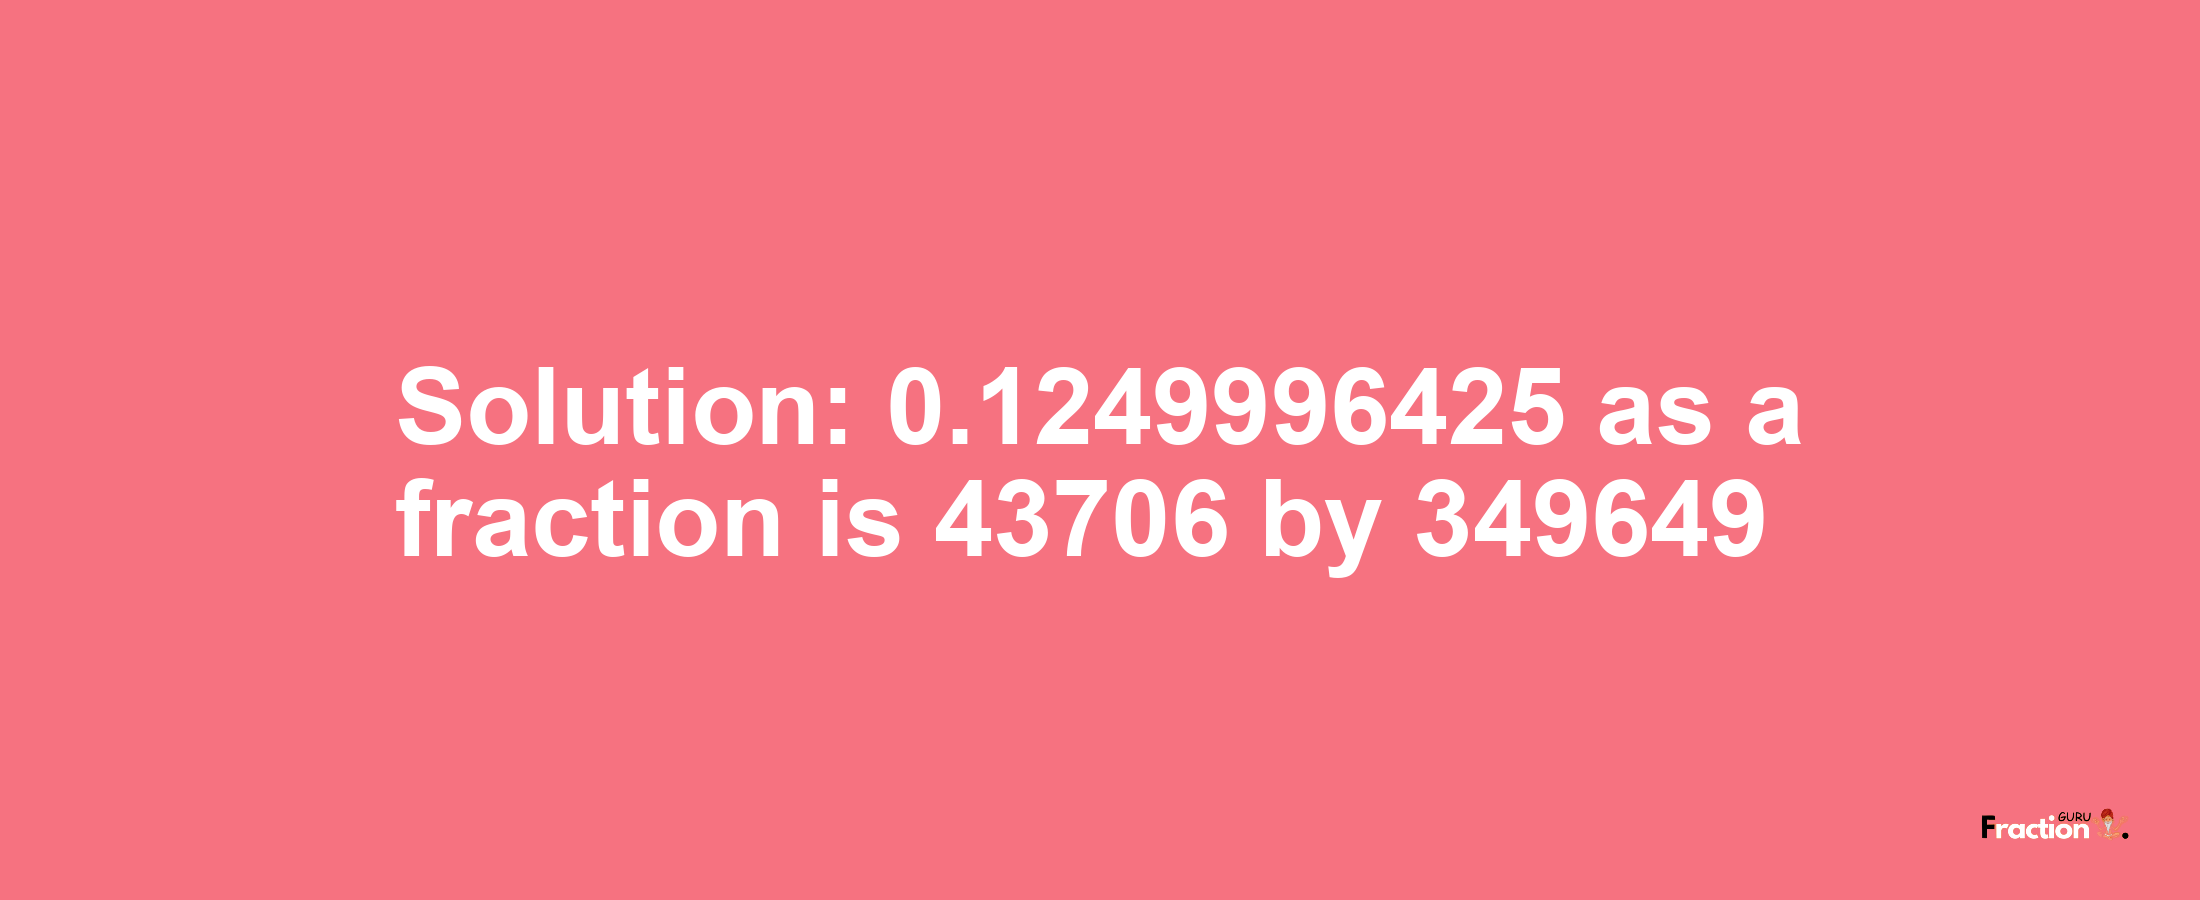 Solution:0.1249996425 as a fraction is 43706/349649